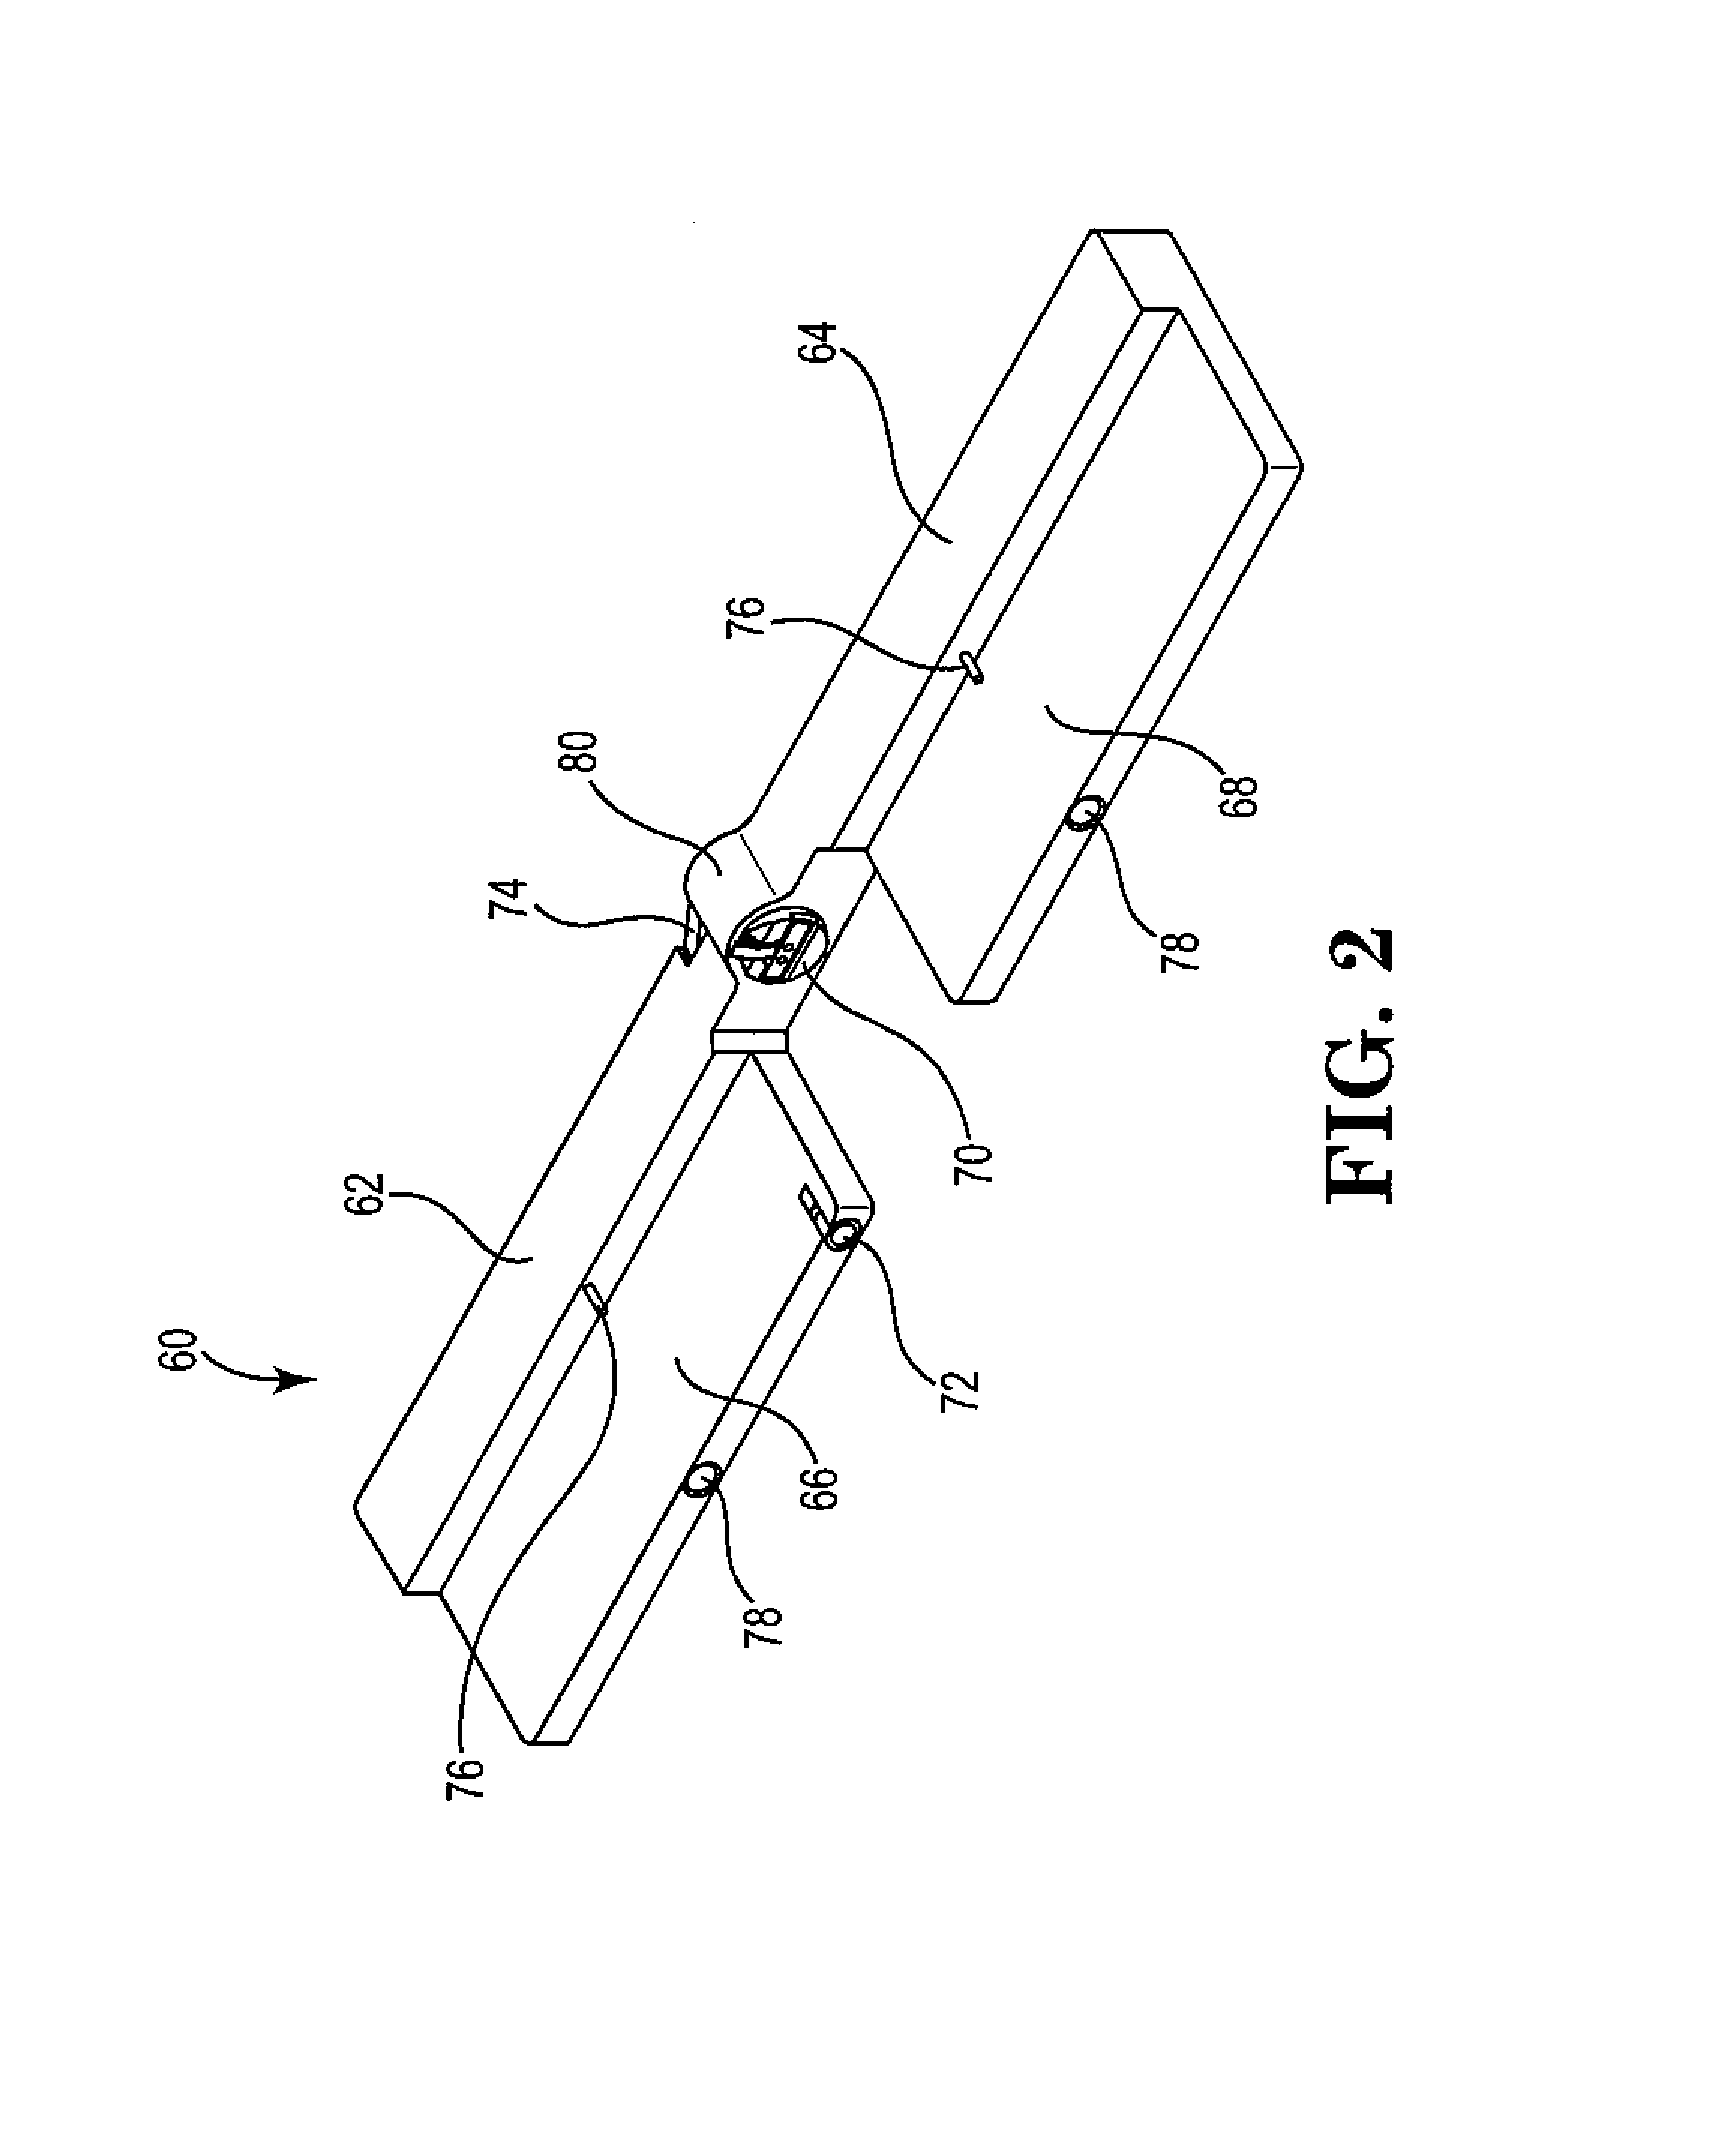 Coiling device for making an electrode assembly and methods of use